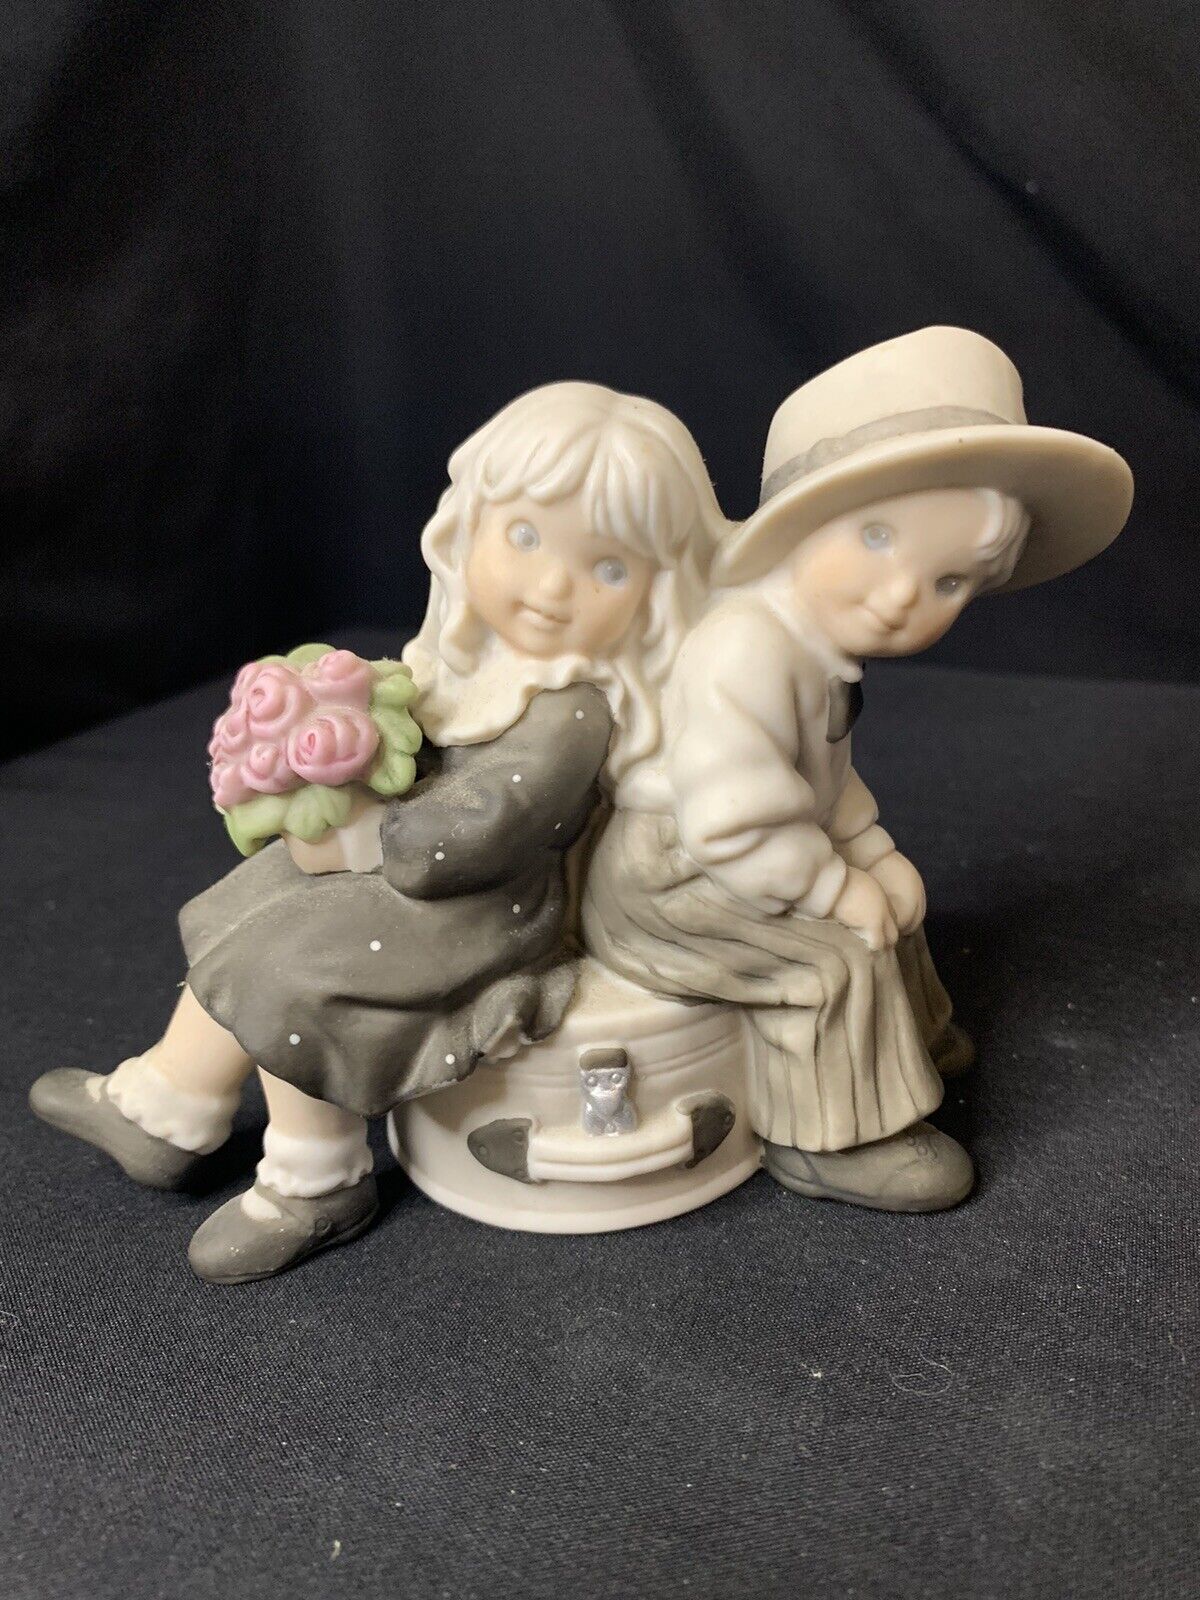 1996 Enesco “Just You And Me Always” Kim Anderson Ceramic Figurine #201963